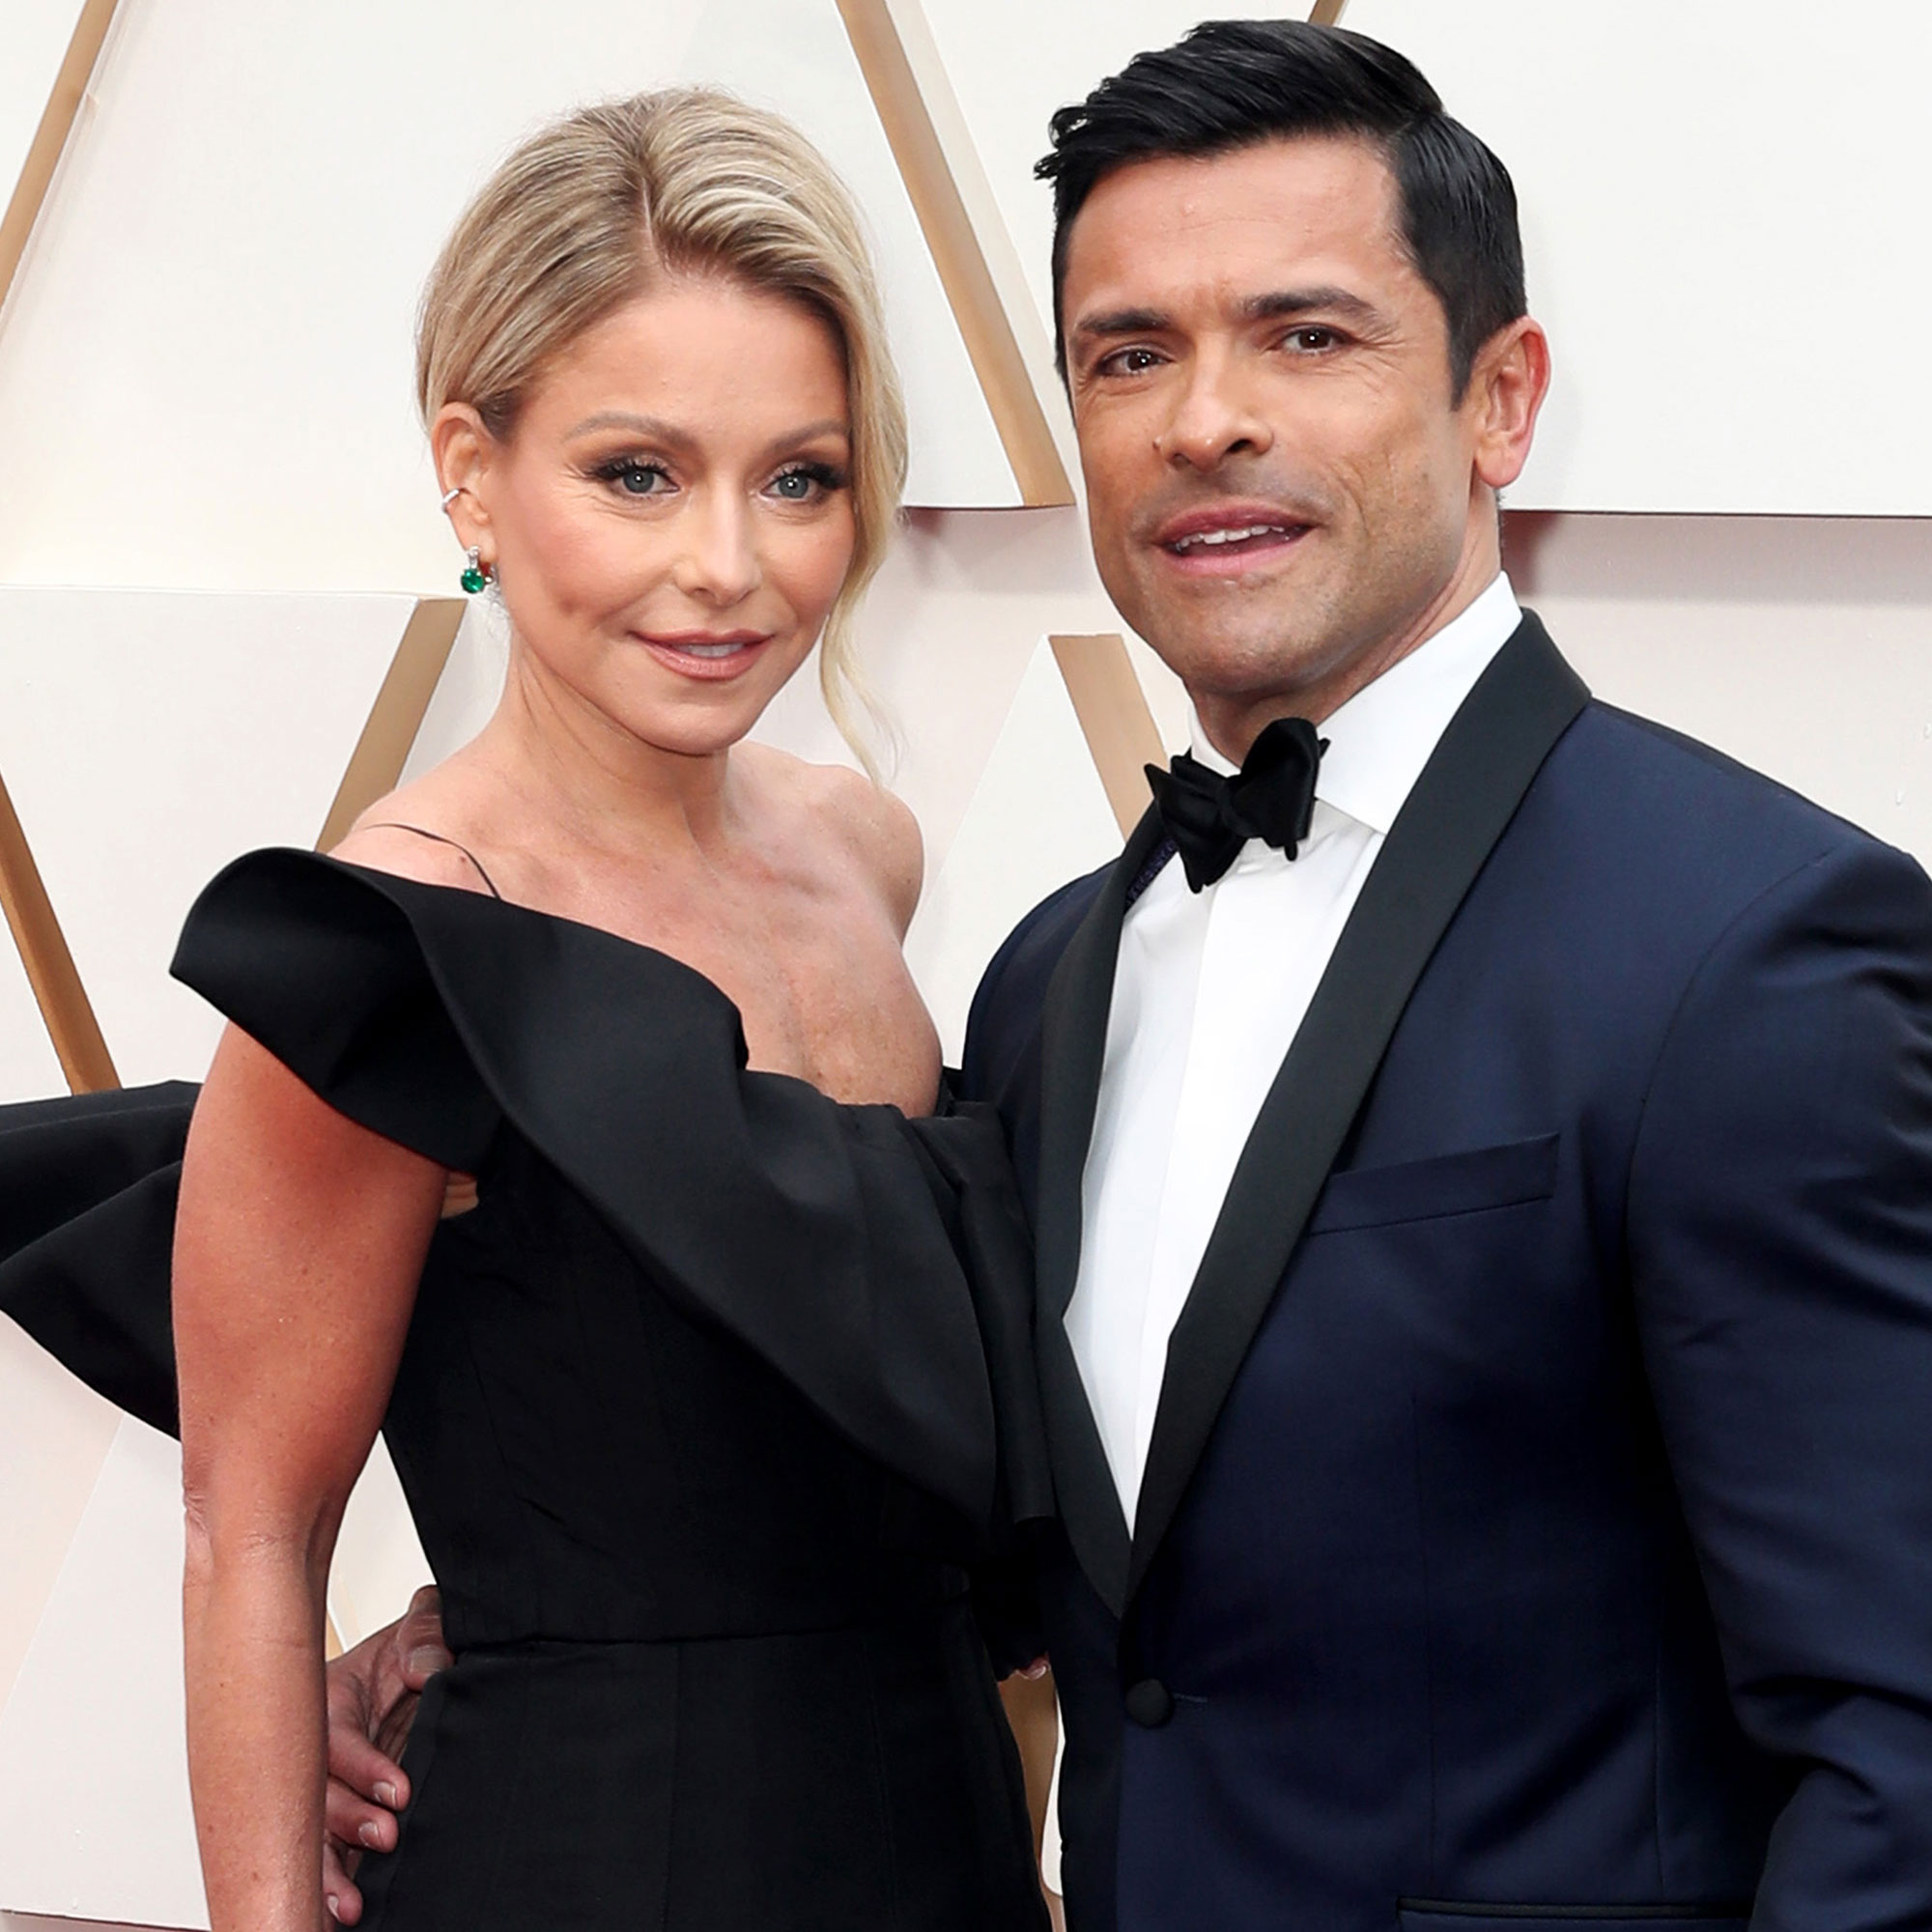 Kelly Ripa and Mark Consuelos NSFW Sex Confessions image pic